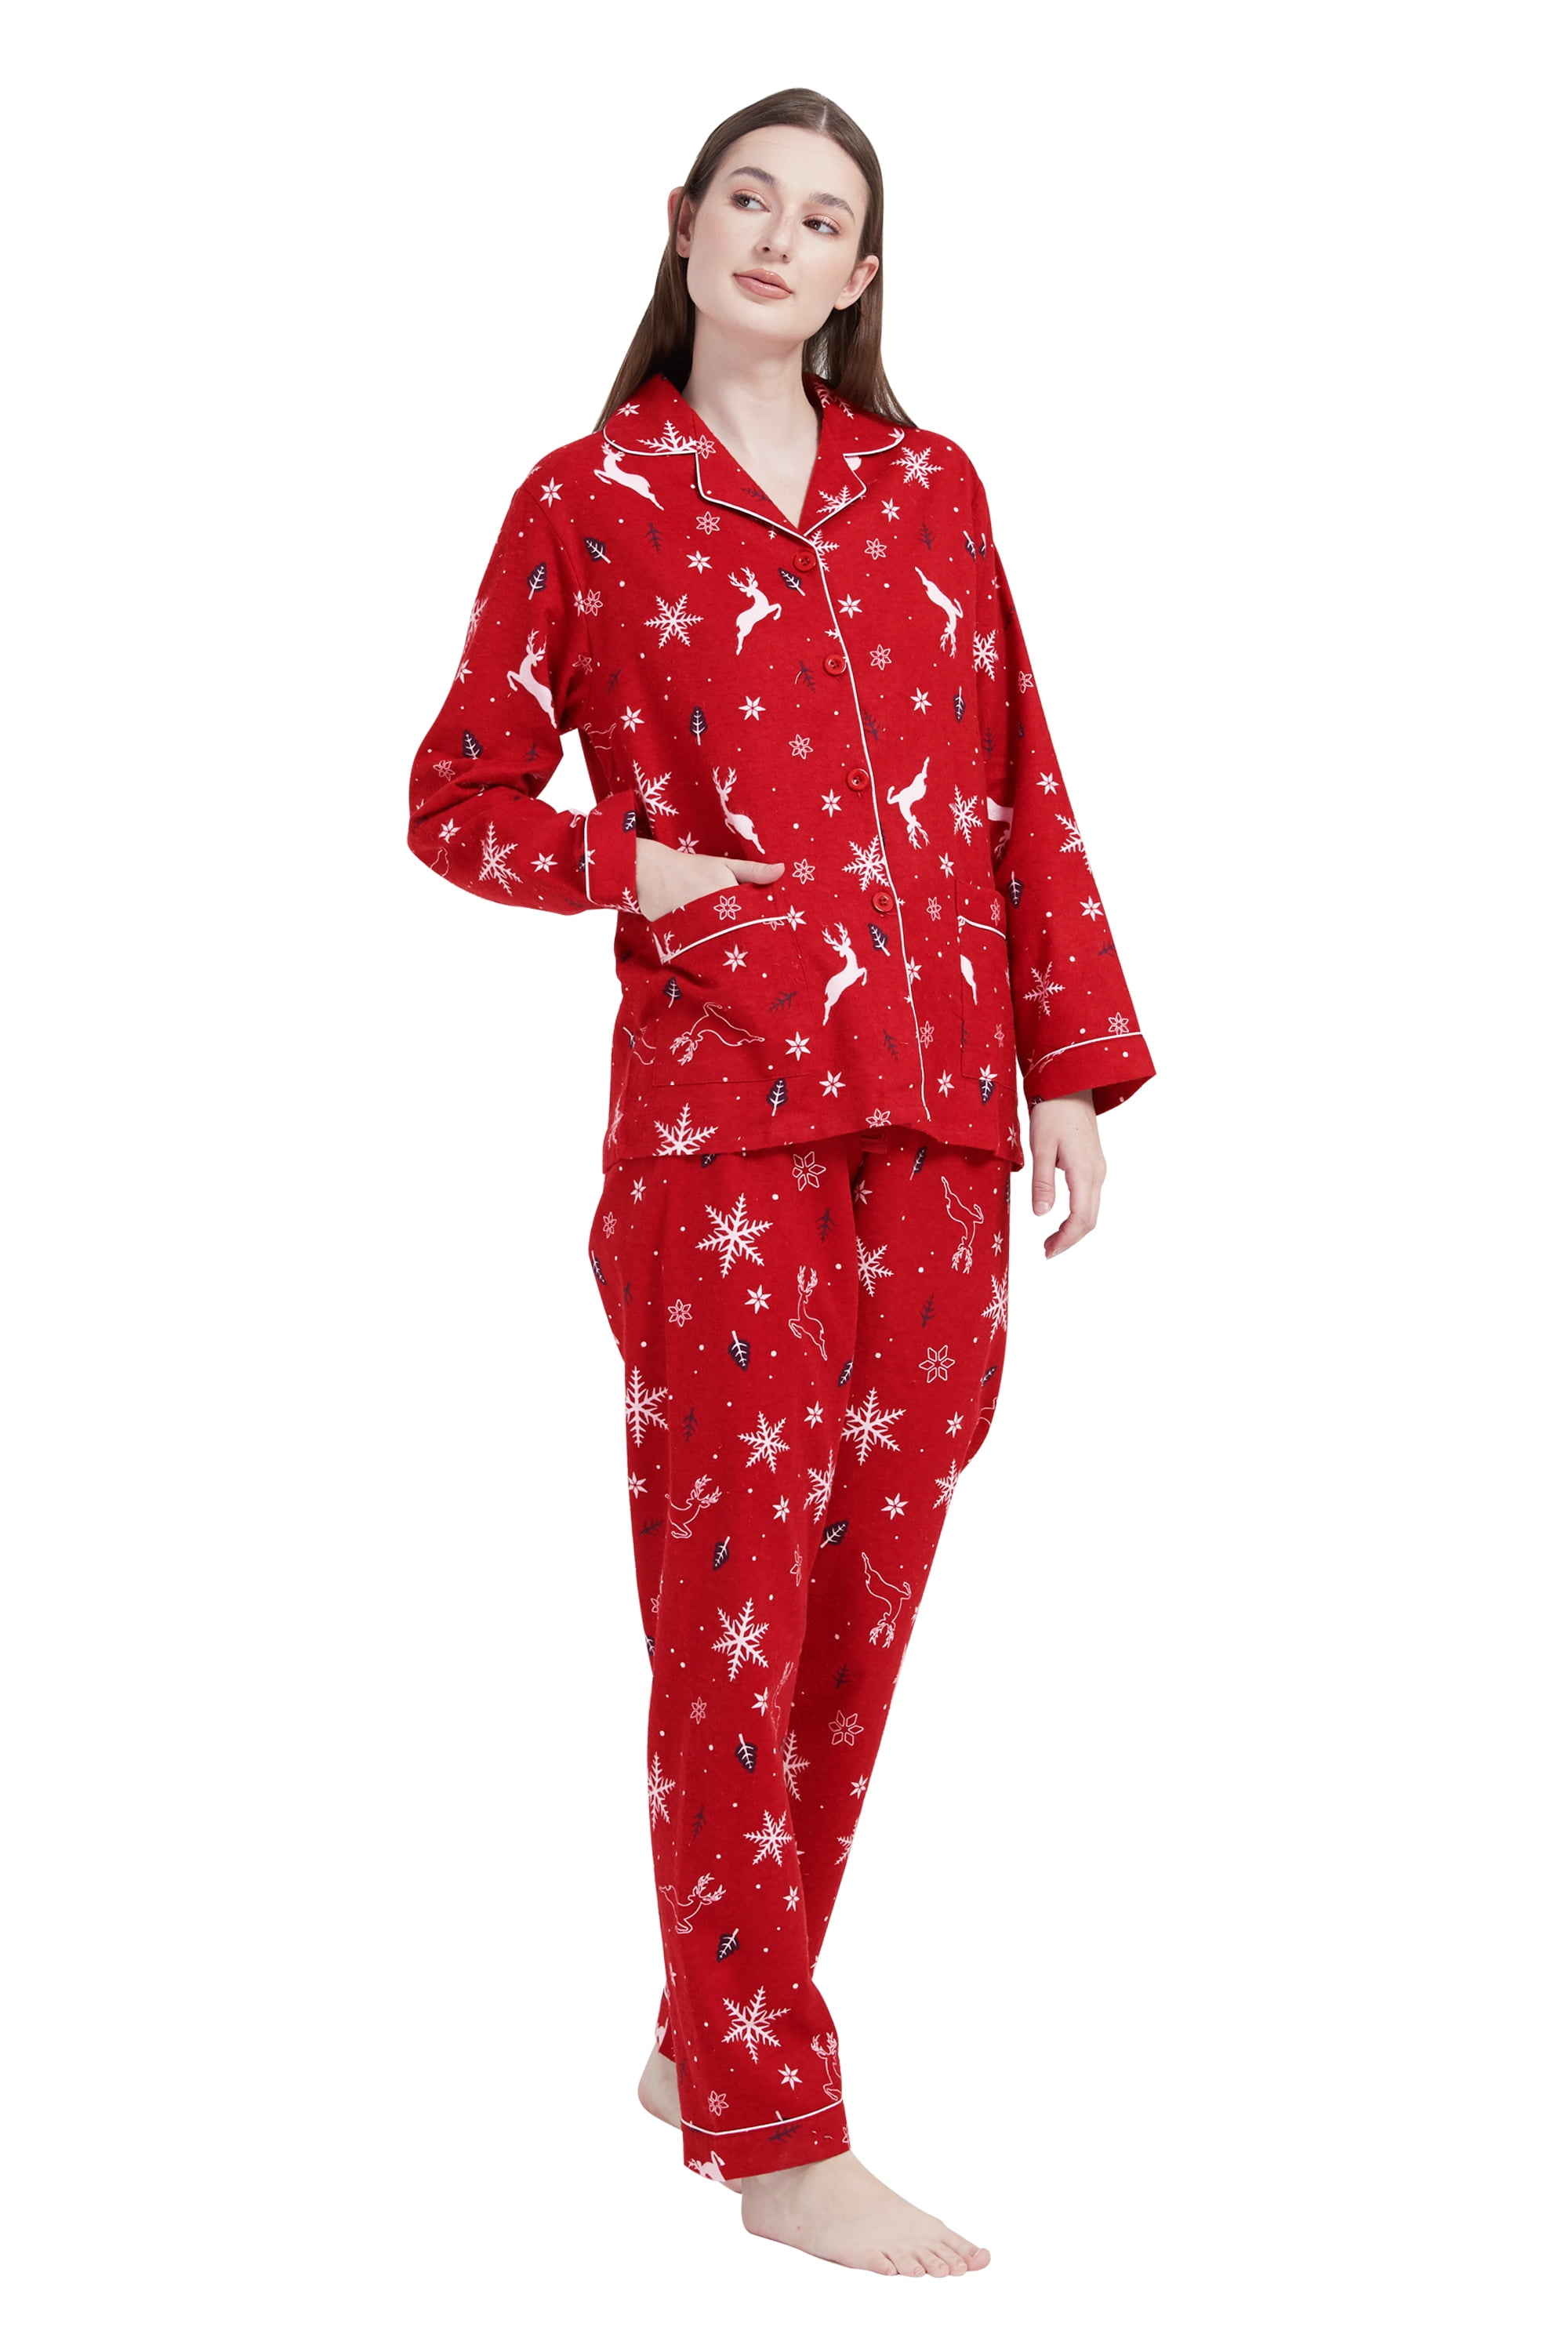 GLOBAL 100% Cotton Comfy Flannel Pajamas for Women 2-Piece Warm and Cozy Pj  Set of Loungewear Button Front Top Pants, Size M 